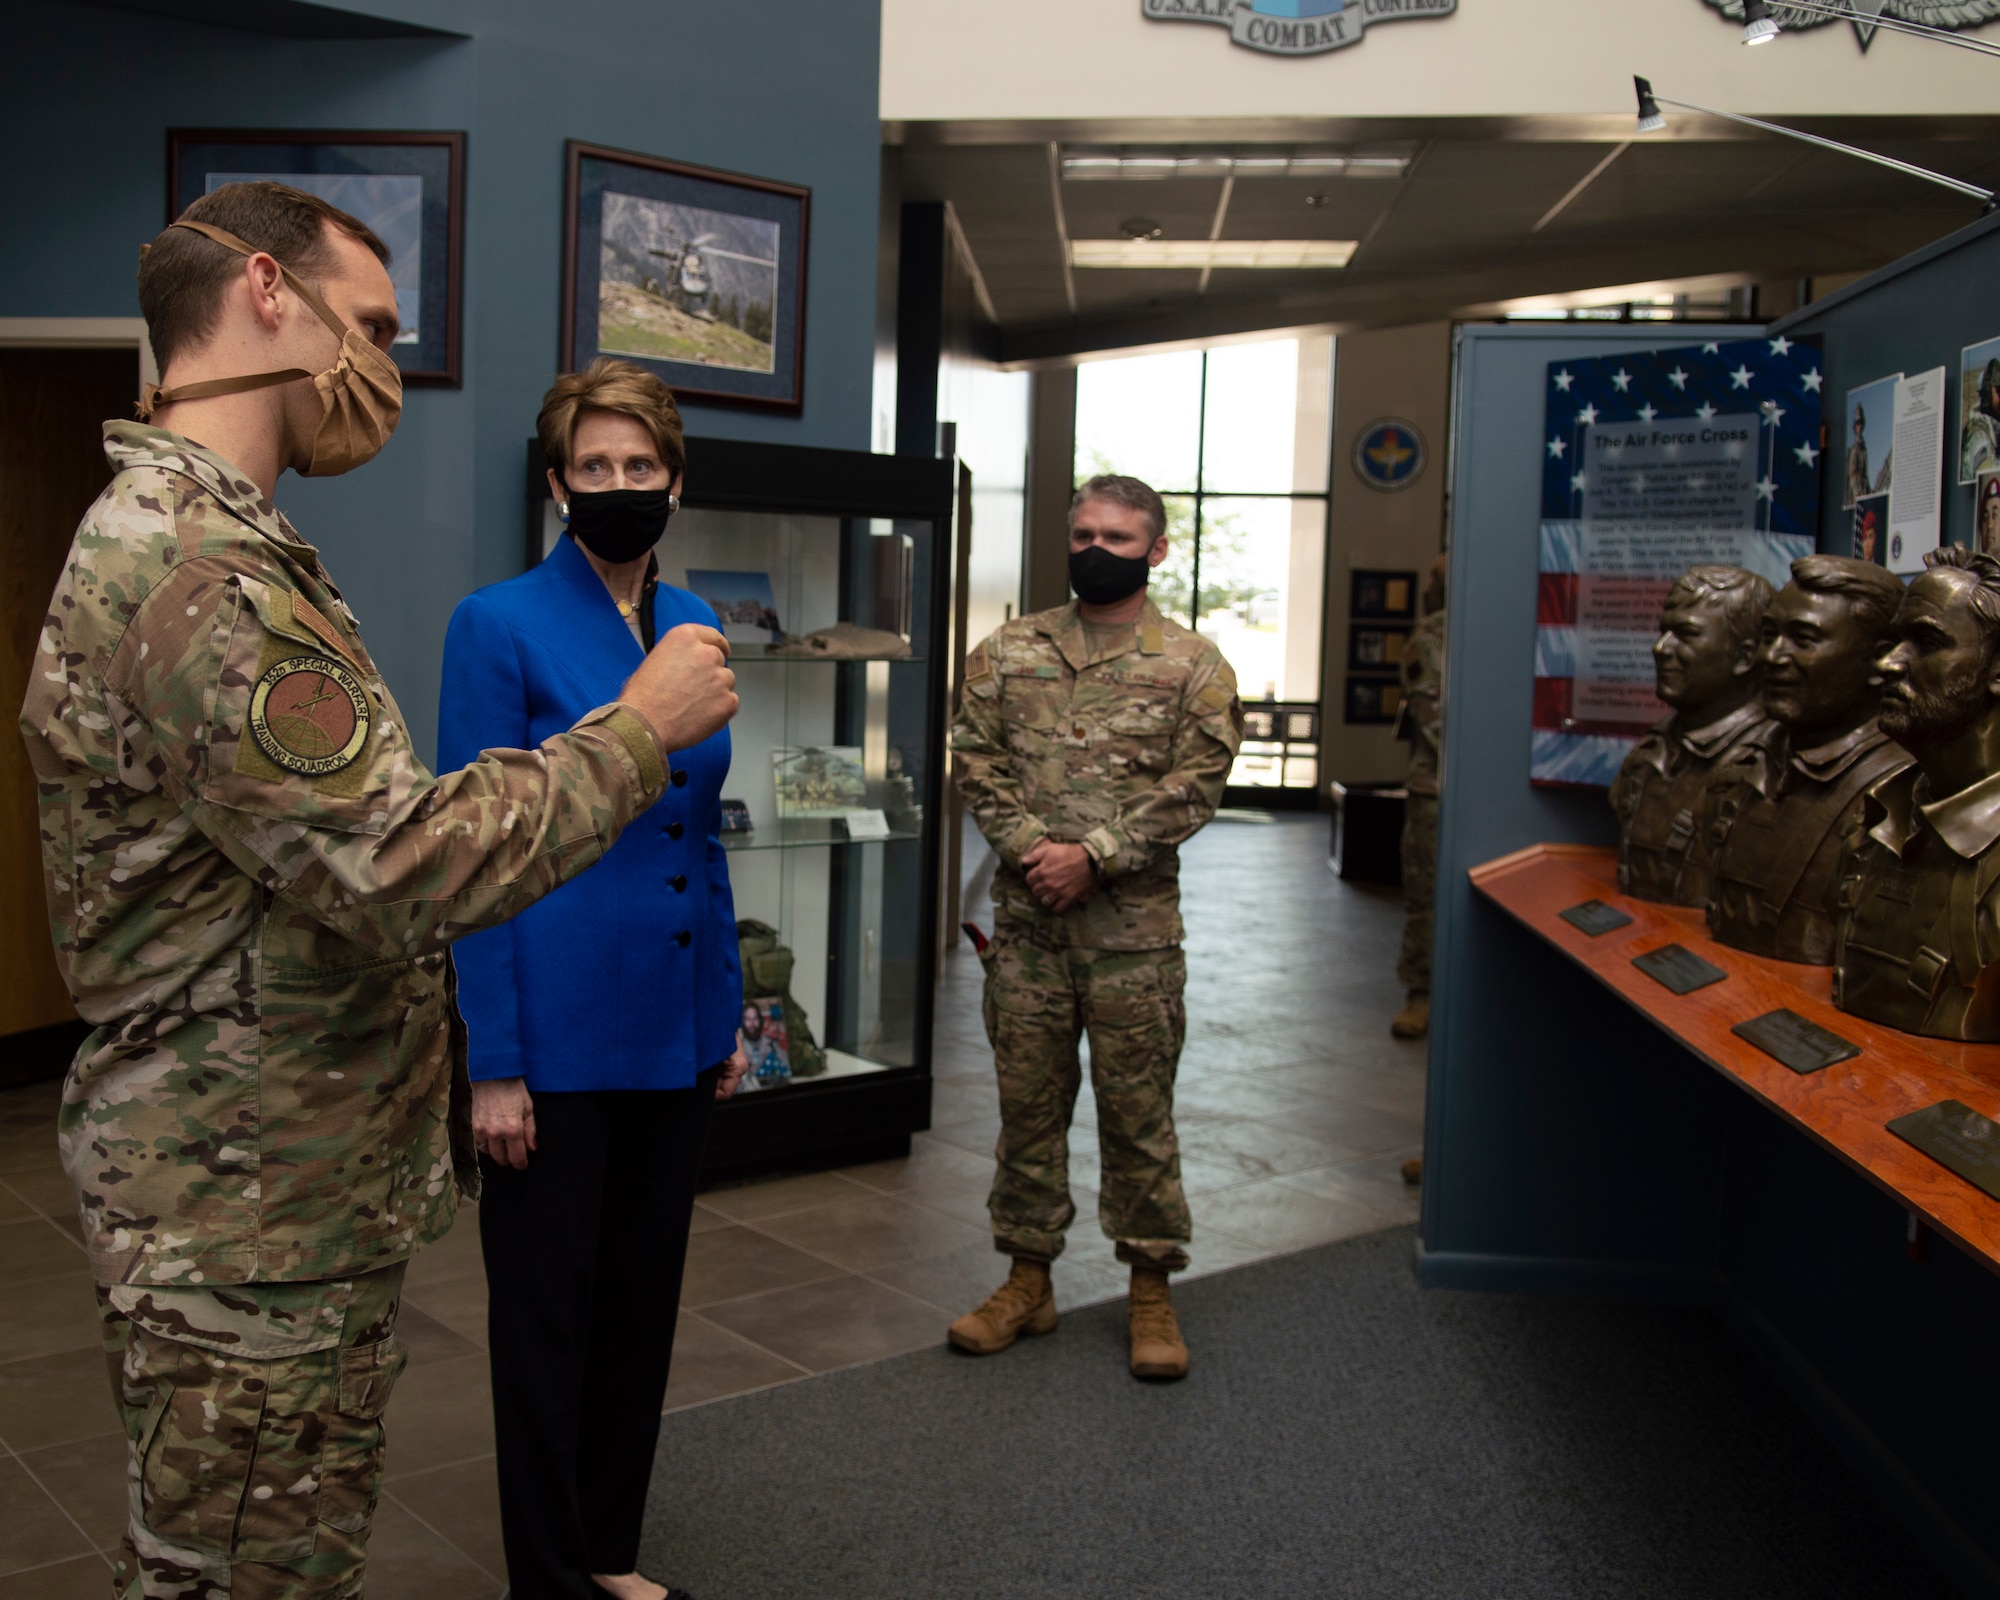 Secretary of the Air Force Barbara M. Barrett visited Pope Army Airfield, North Carolina on July 16 to discuss joint operations and the integral part the Air Force plays during global responses.